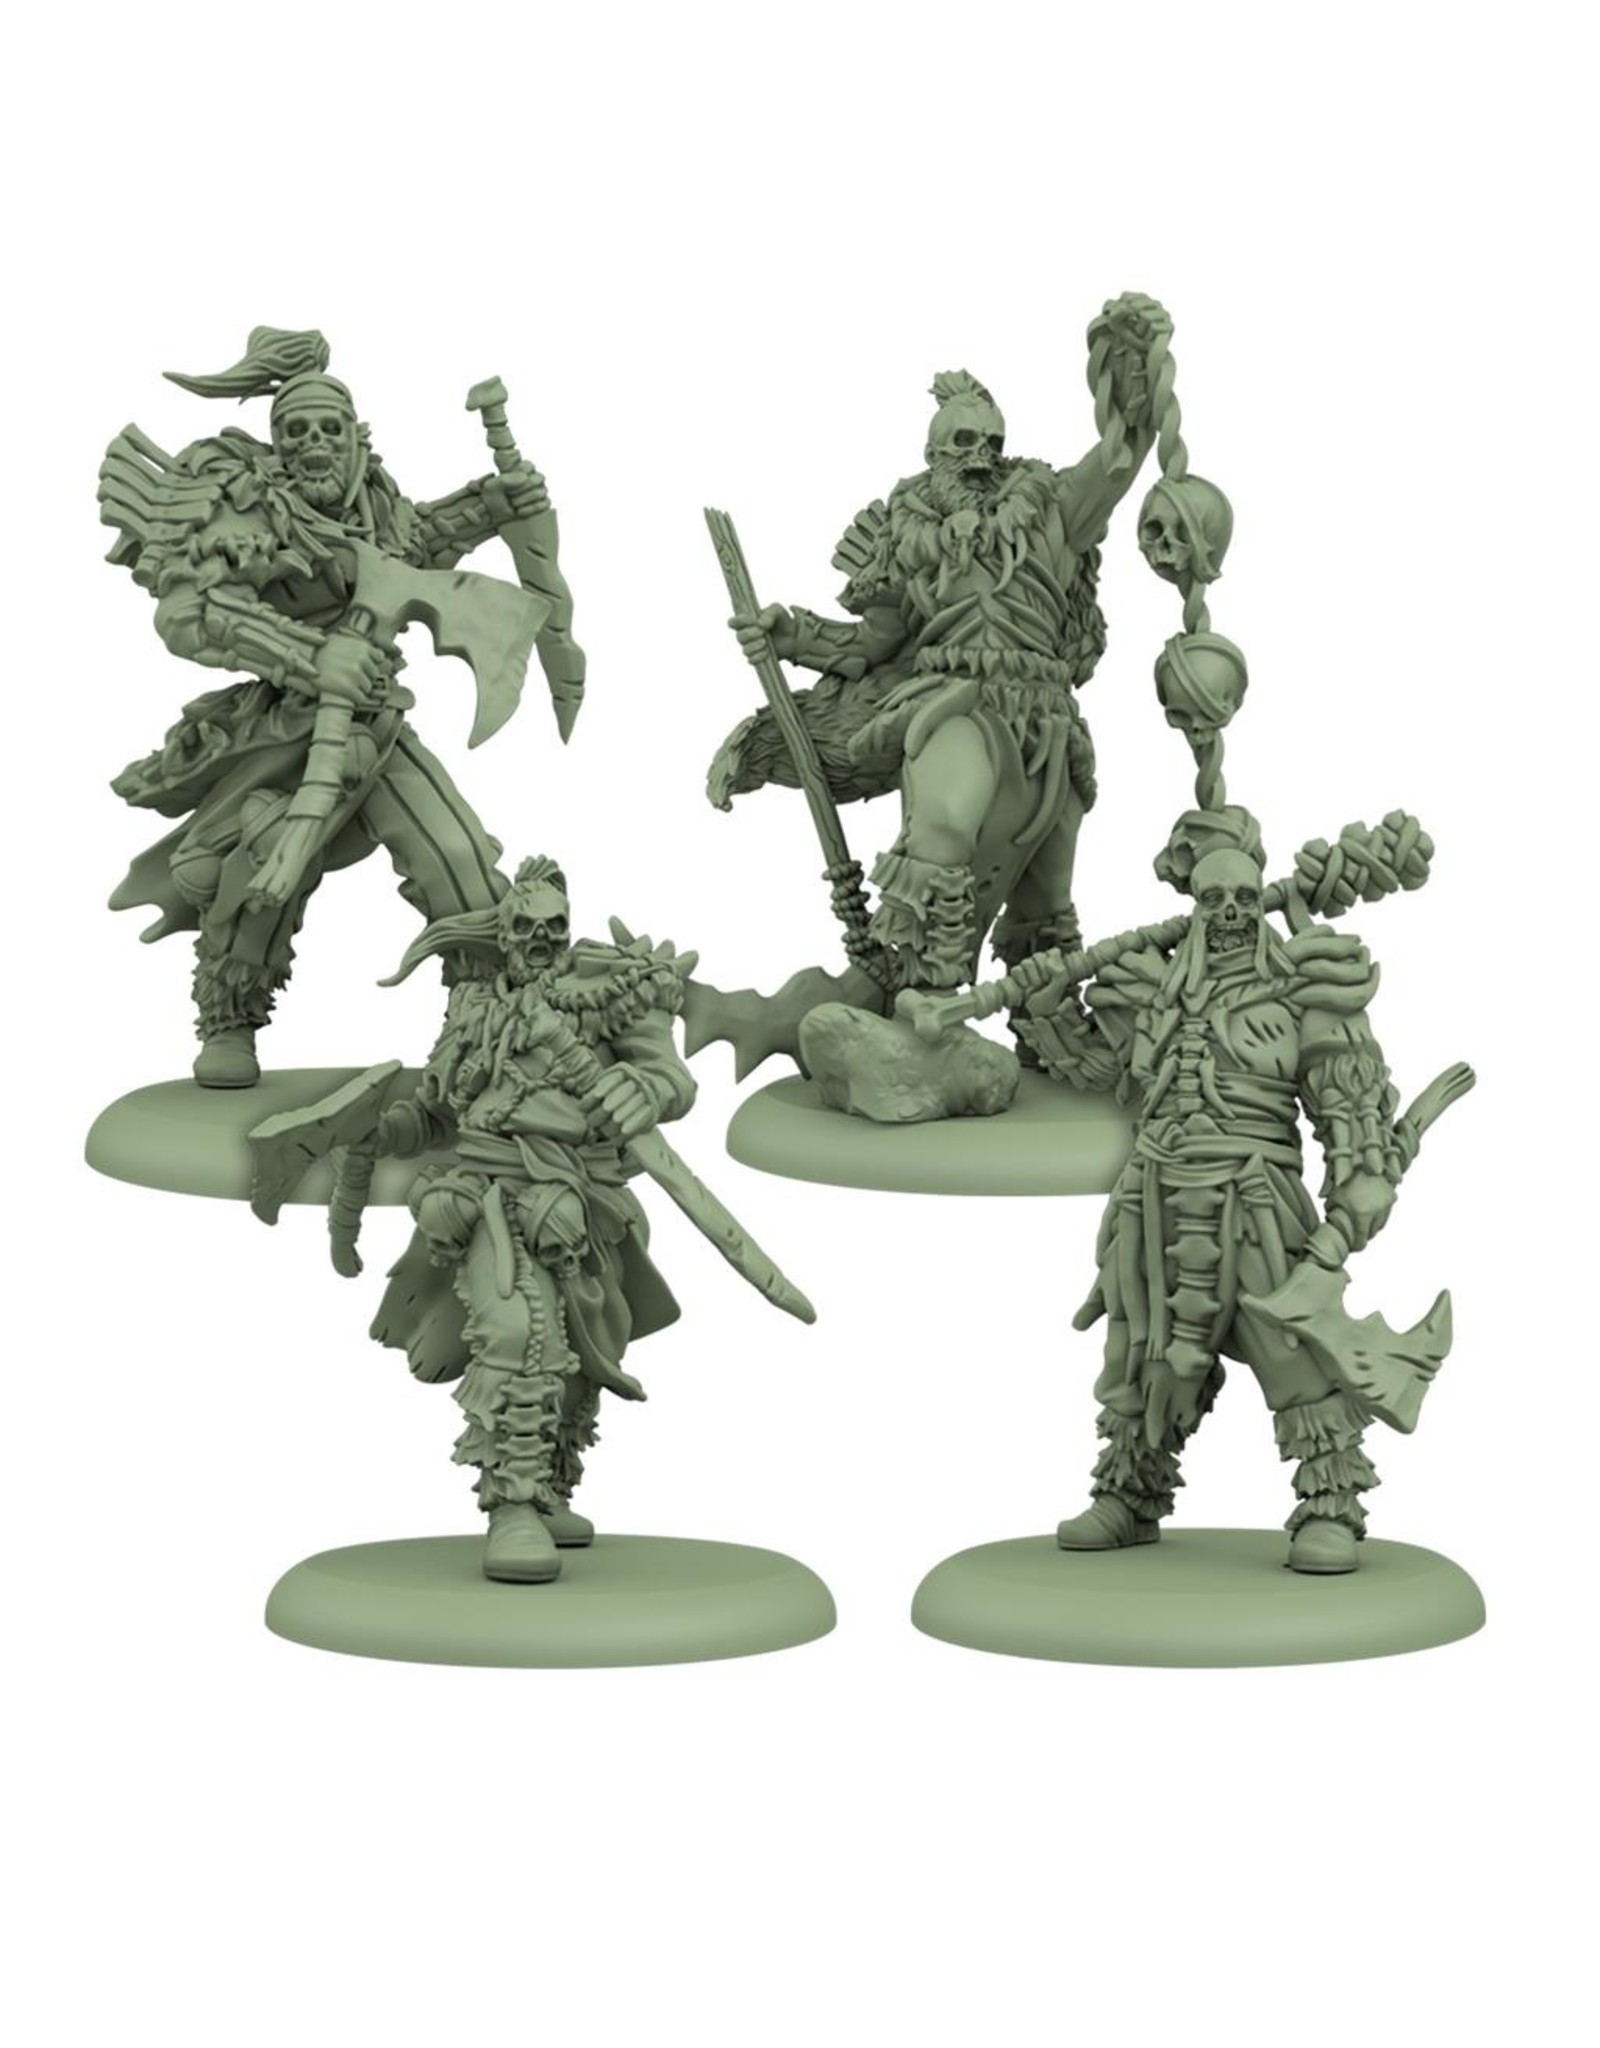 Cool Mini or Not A Song of Ice & Fire Tabletop Miniatures Game: Free Folk Followers of Bone